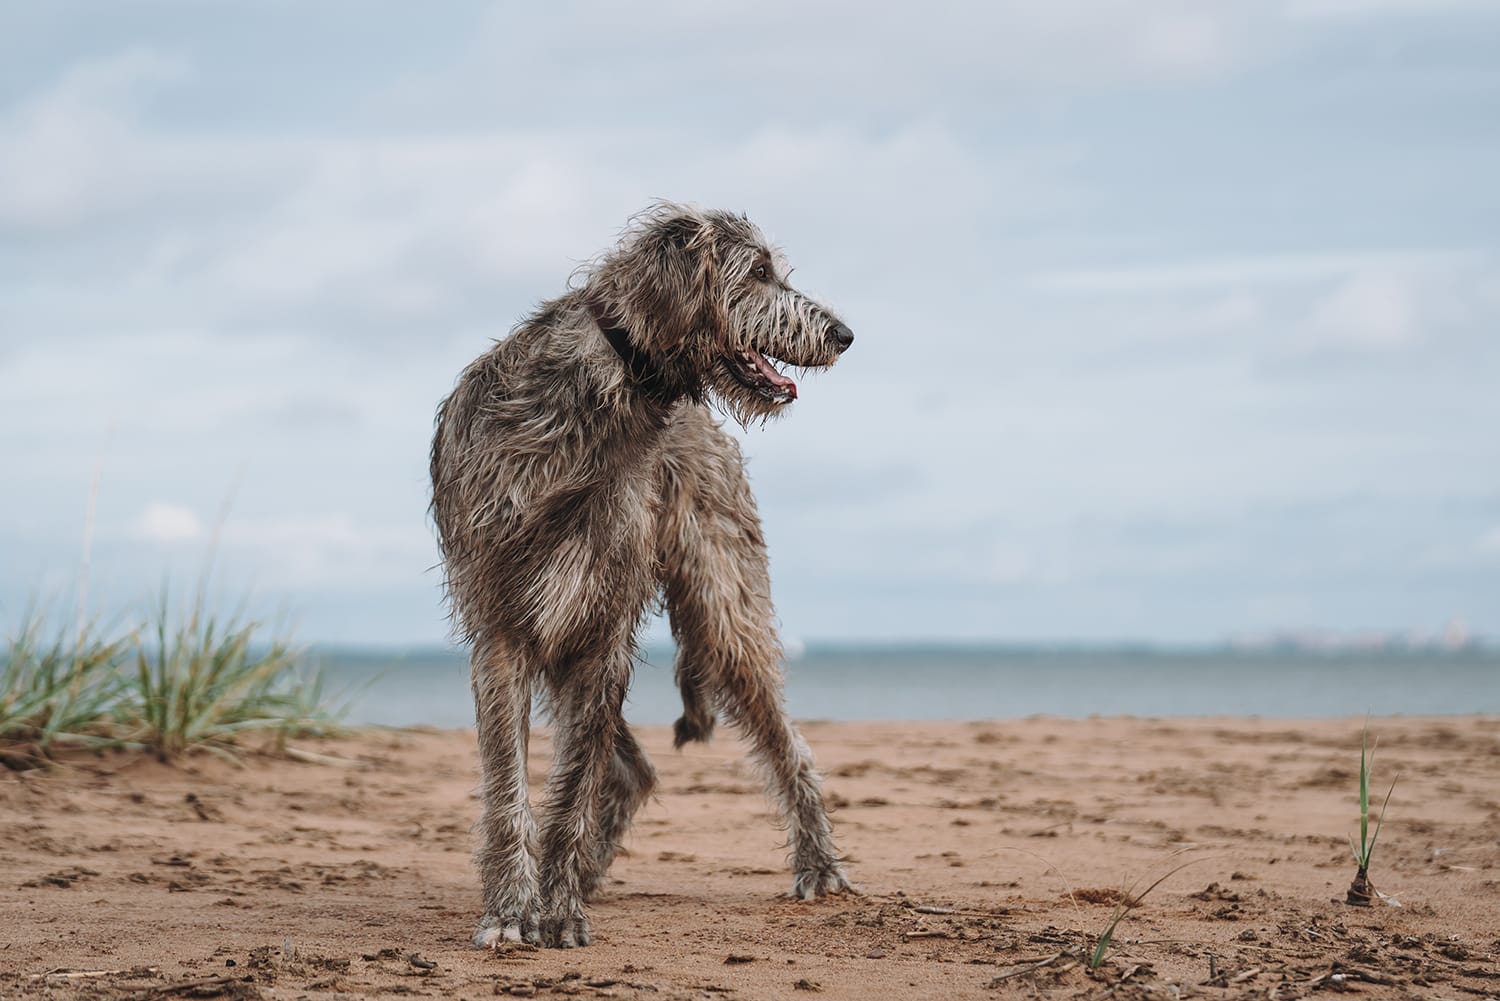 Irish wolfhound on a sandy beach, looking to the side.